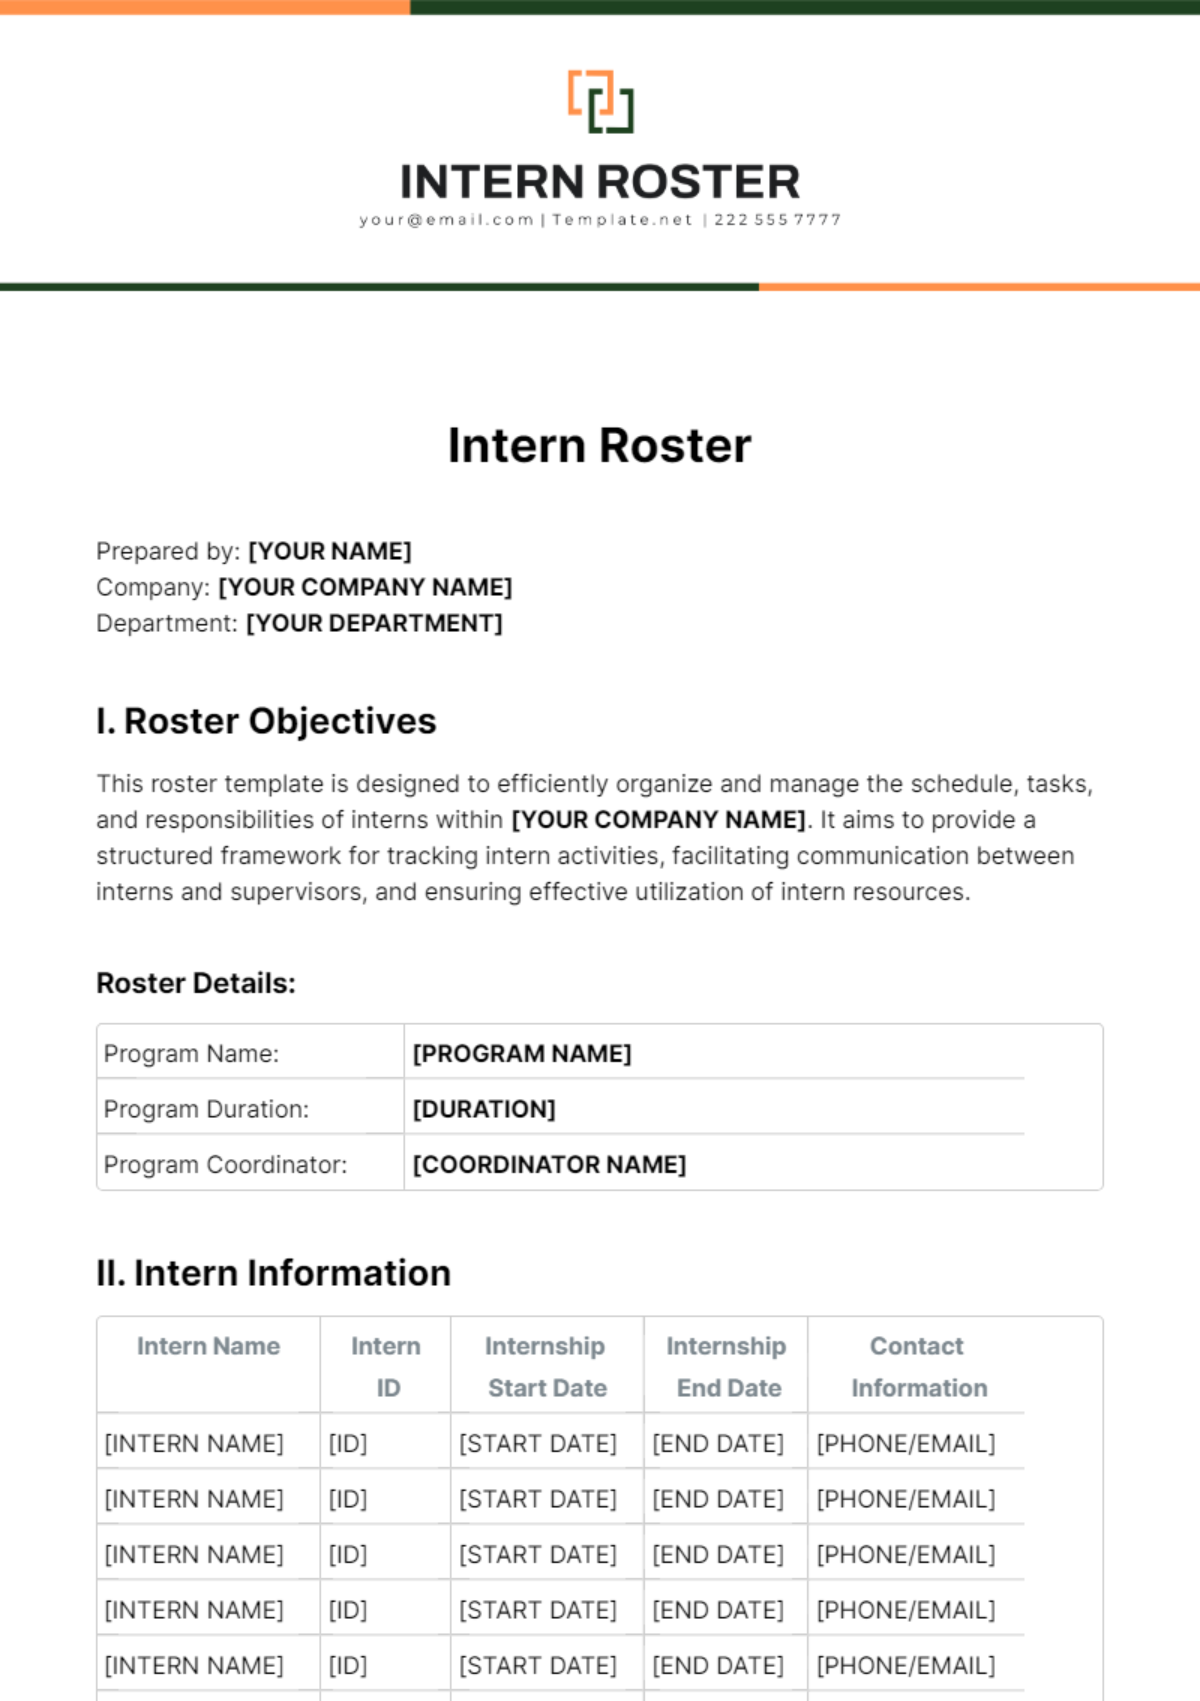 Intern Roster Template